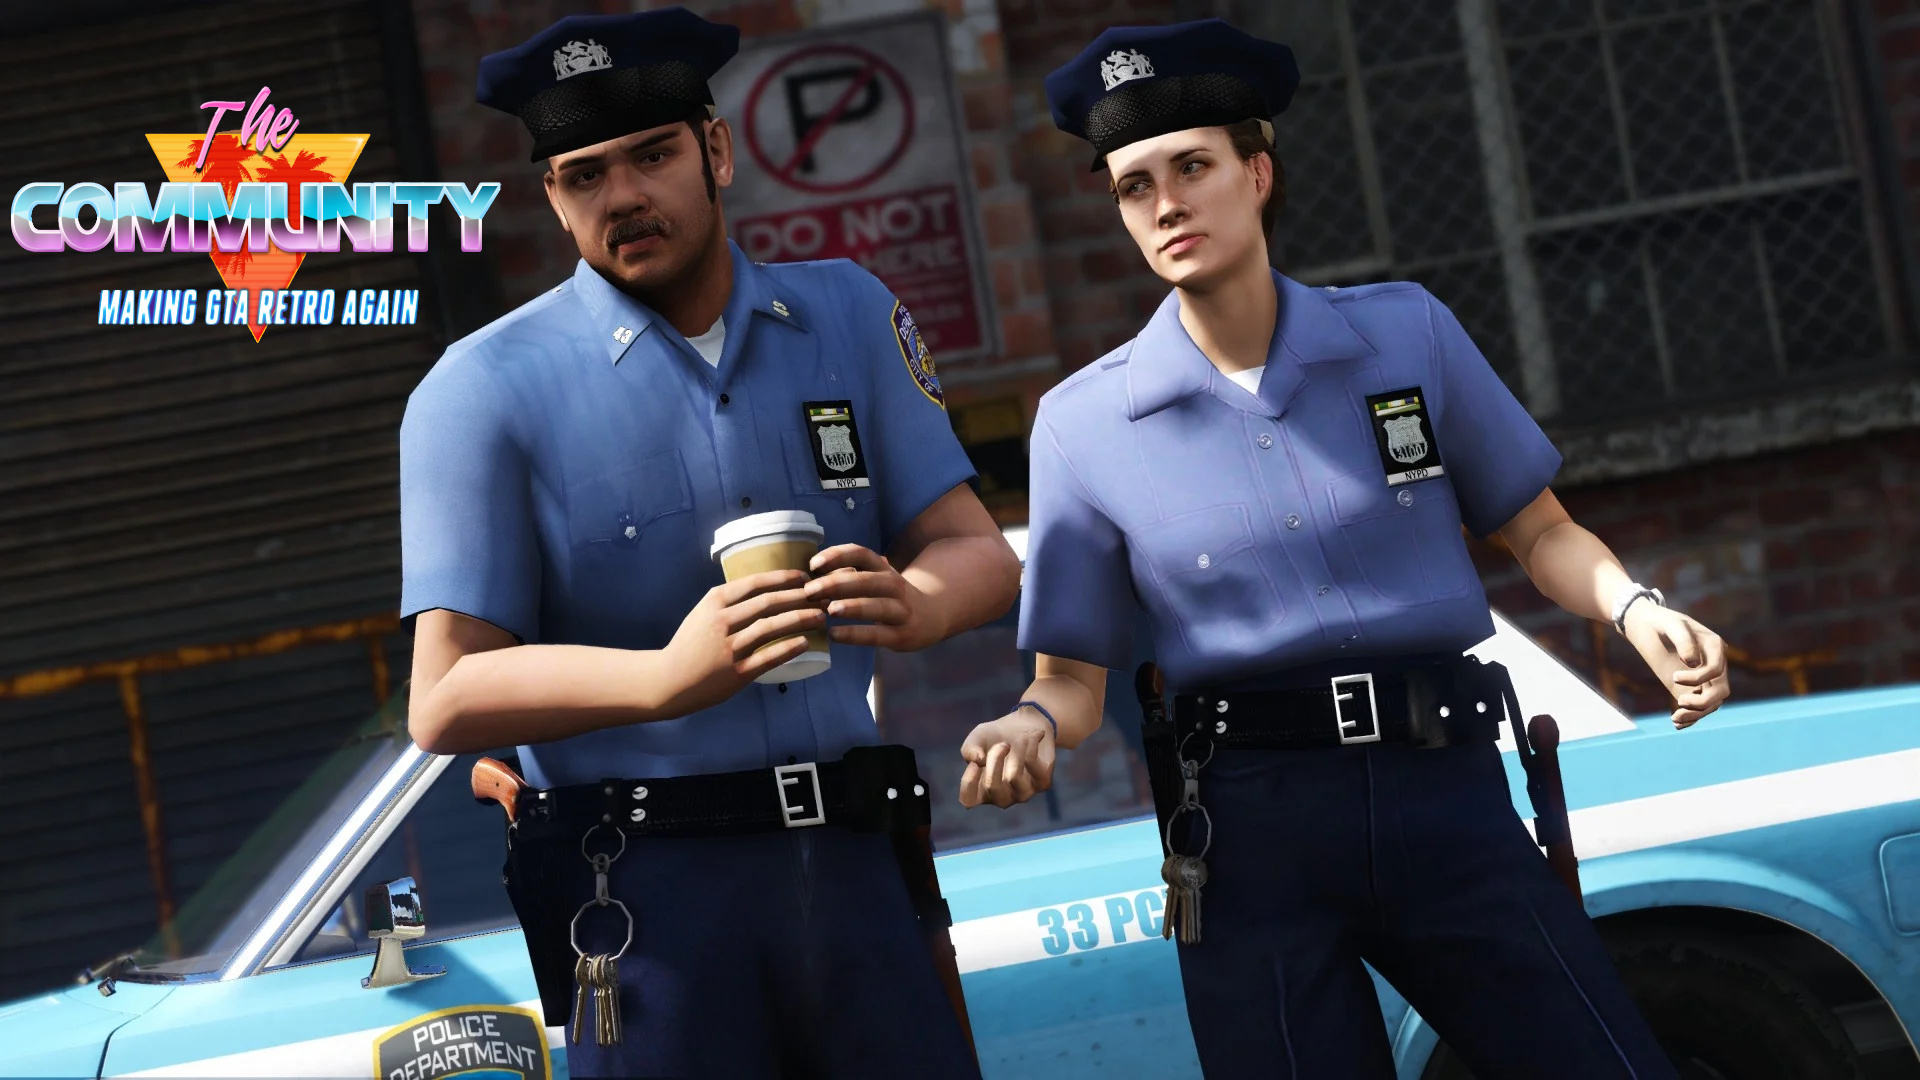 Lcpd Nypd Police Peds 80s Gta5